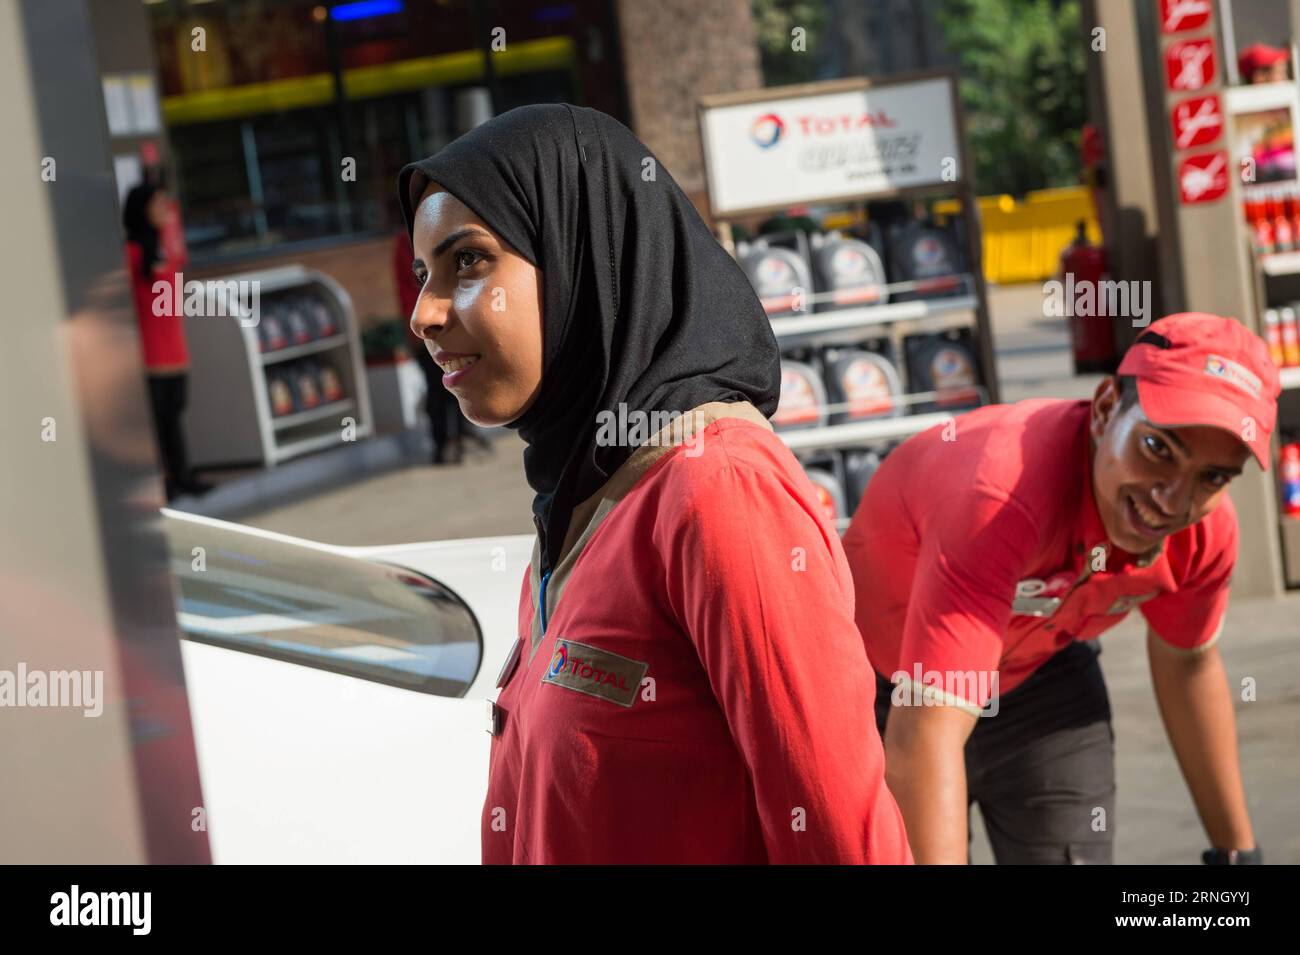 Ägypten - Weibliche Arbeitskräfte an einer Tankstelle in Kairo (161018) -- CAIRO, Oct. 18, 2016 -- Female and male employees work together at a gas station in Maadi district of Cairo, Egypt, Oct. 17, 2016. Dressed in red buttonless shirt and black pants uniform, 24-year-old veiled Hadeer Ashraf looked confident and swift while holding the fuel pump nozzle gun to serve the vehicles lined up at Total gas station near the Nile Corniche Street in Maadi district southwestern the Egyptian capital city of Cairo. ) (yk) EGYPT-CAIRO-GAS STATION-FEMALE WORKERS MengxTao PUBLICATIONxNOTxINxCHN   Egypt Fem Stock Photo